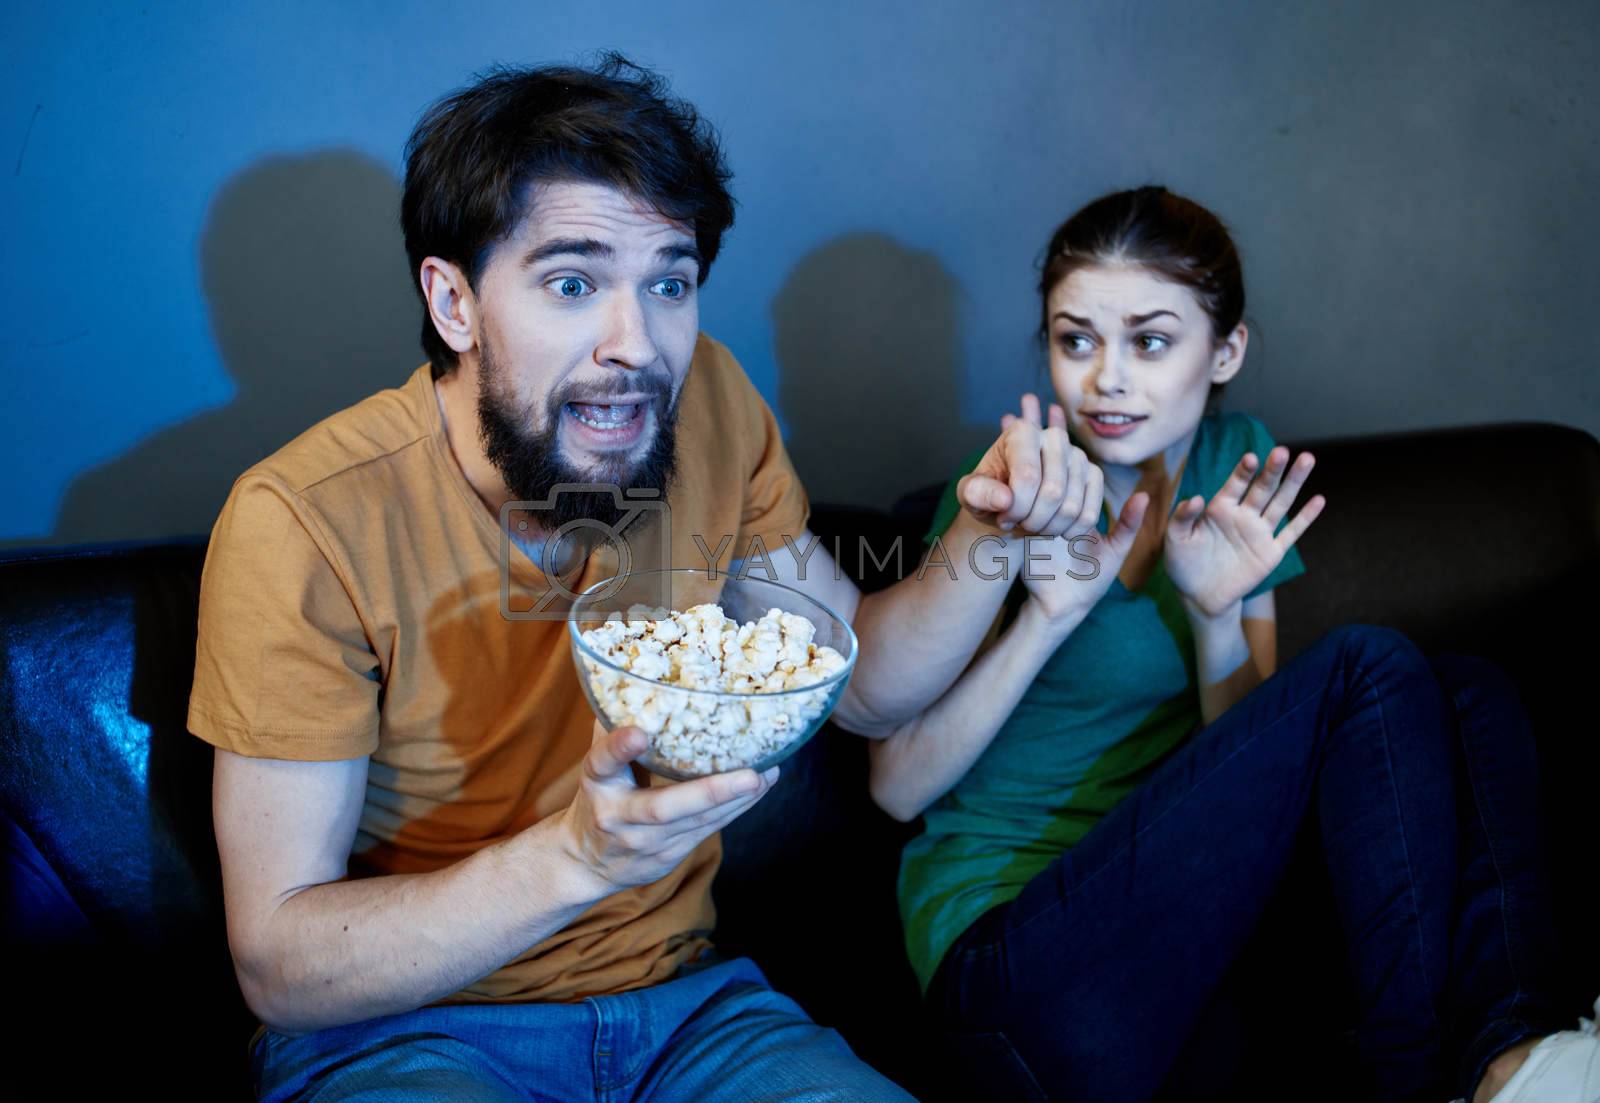 Royalty free image of Friends man and woman watching TV on the couch and popcorn in a plate by SHOTPRIME